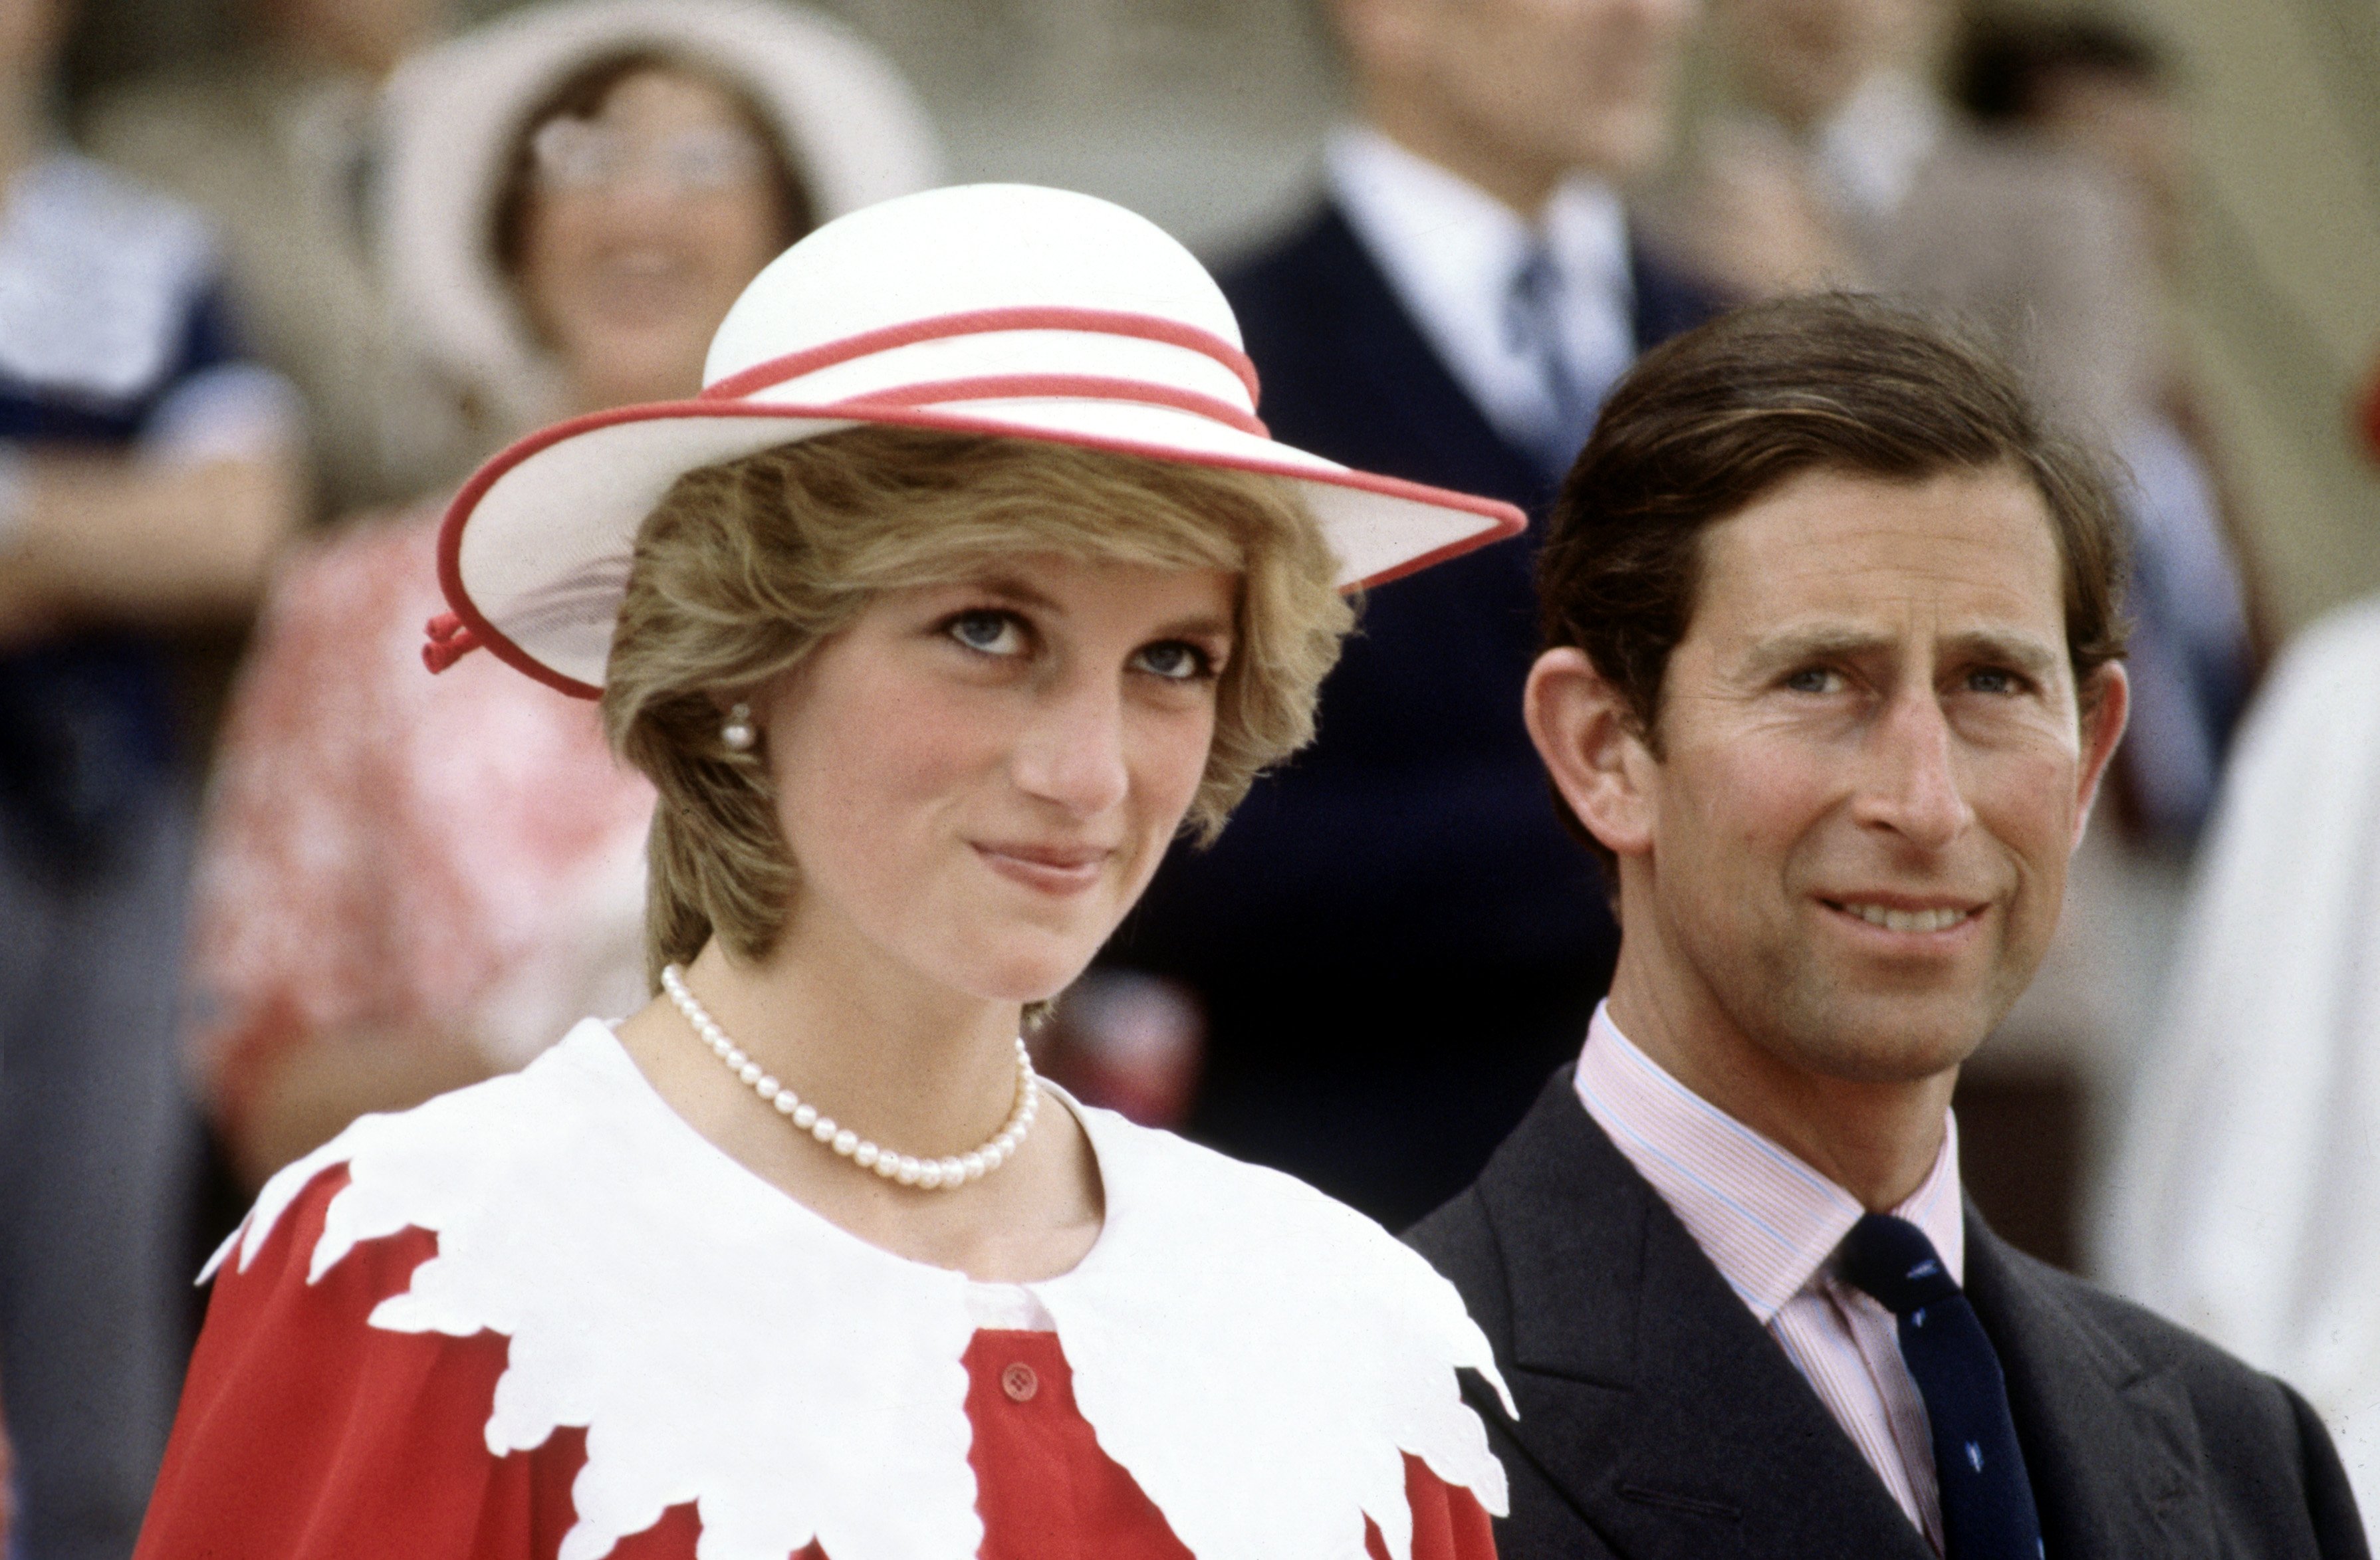 Diana, Princess of Wales and Prince Charles on June 29, 1983 in Edmonton, Alberta, Canada |  Source: Getty Images